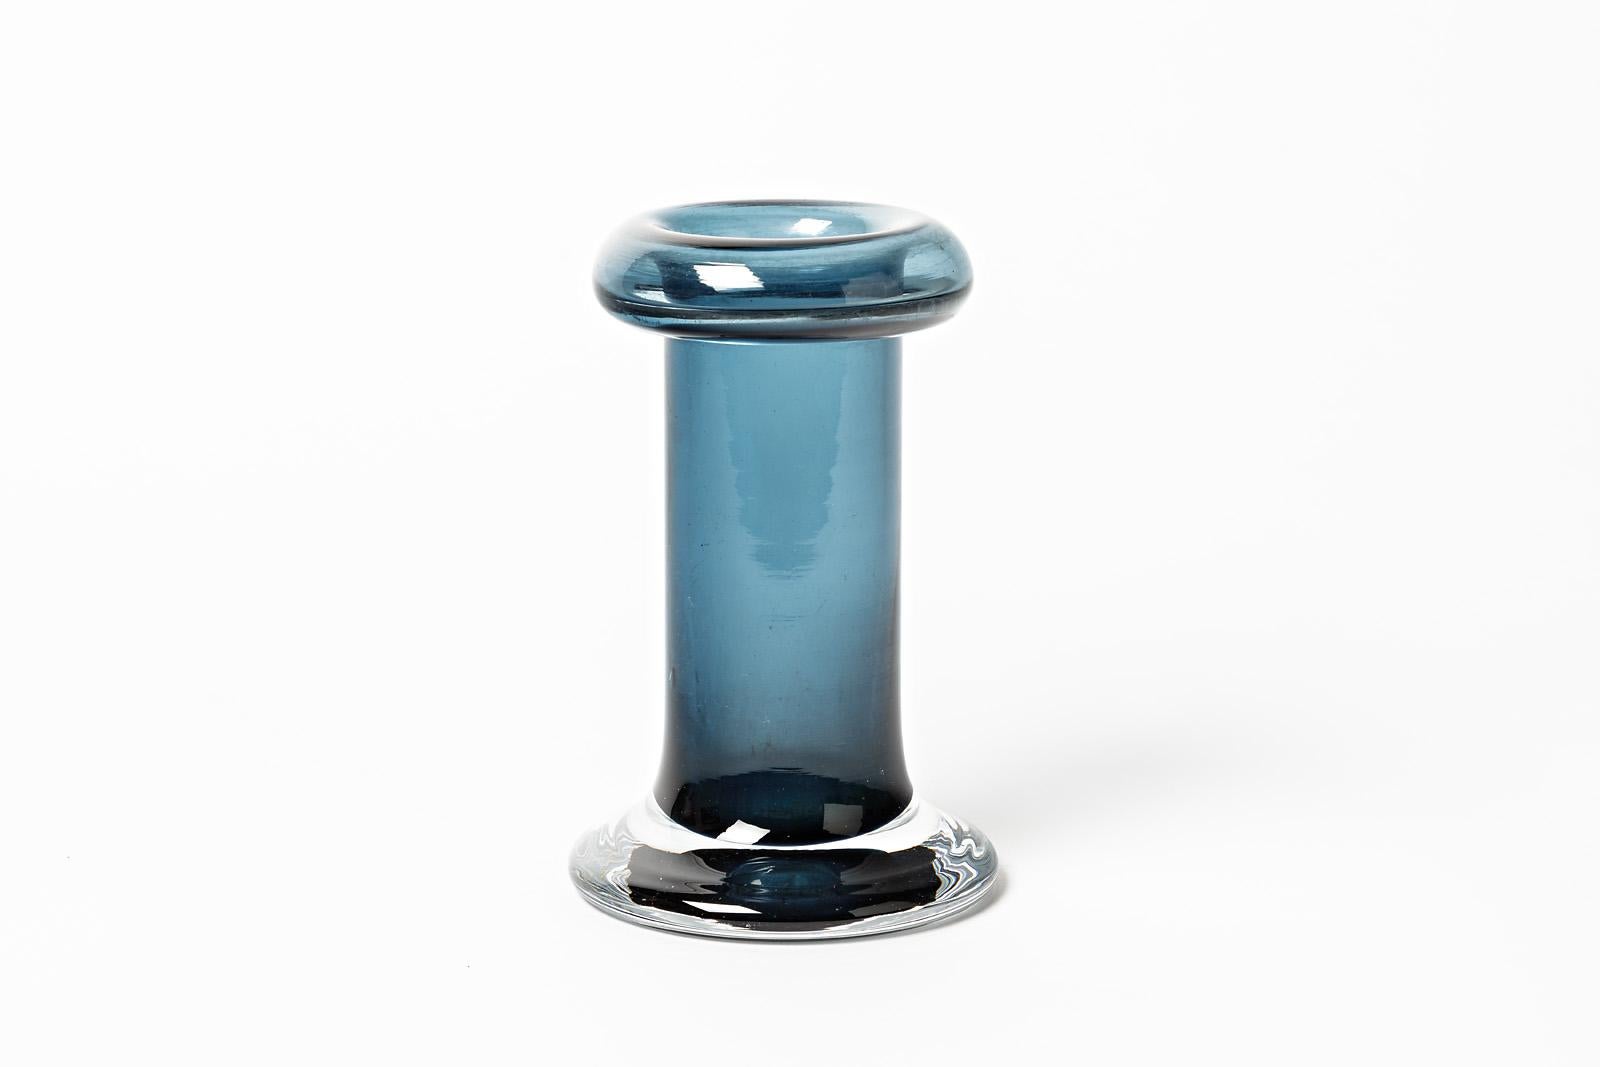 Mid-Century Modern original glass, circa 1970

Elegant blue glass vase by French artist.

Original good conditions

not signed

Measures: Height 19cm, large 11cm.